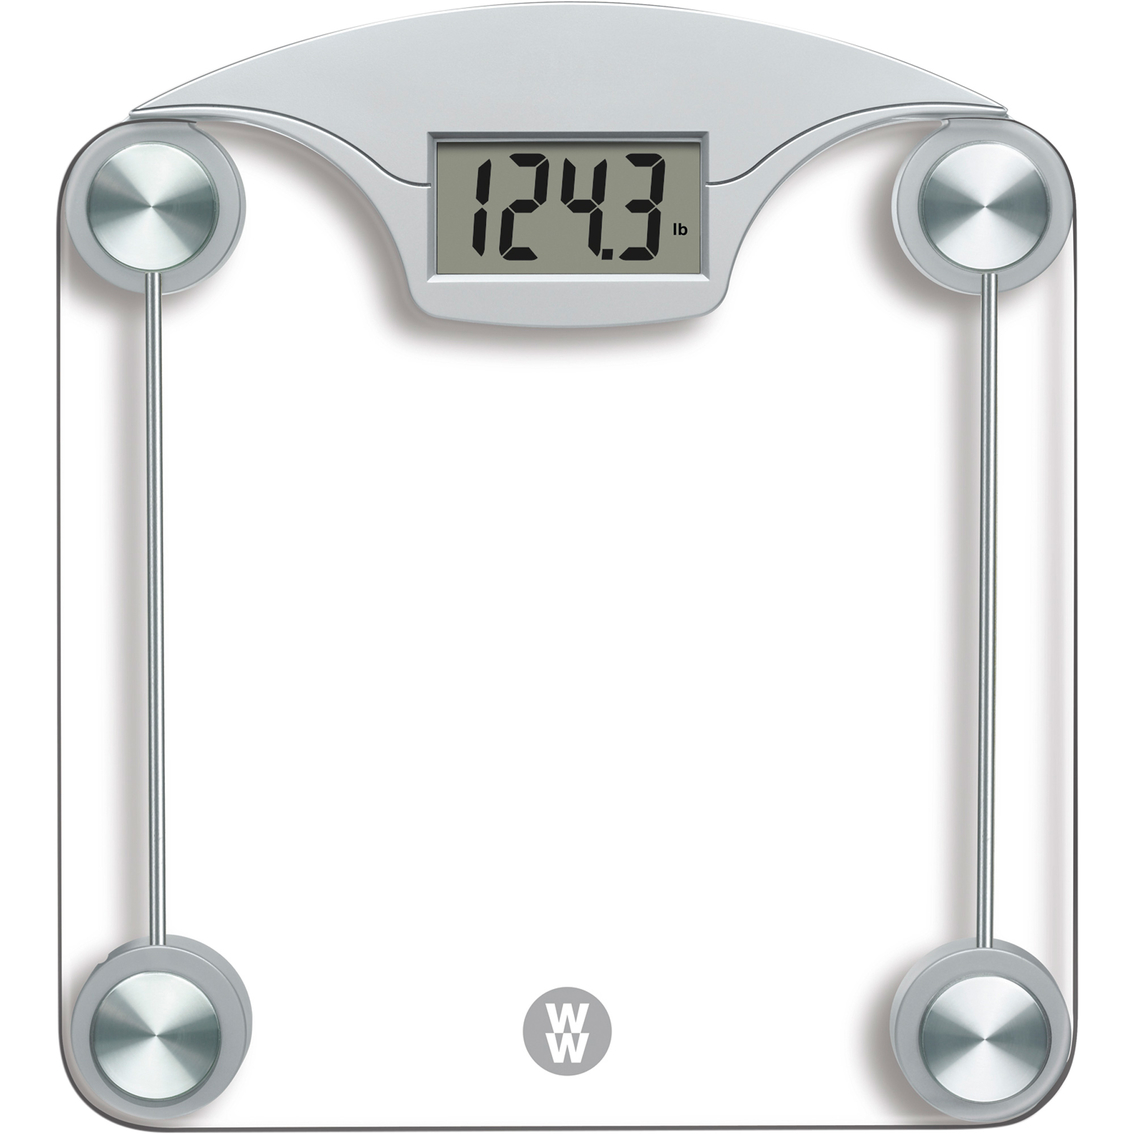 Scale weight